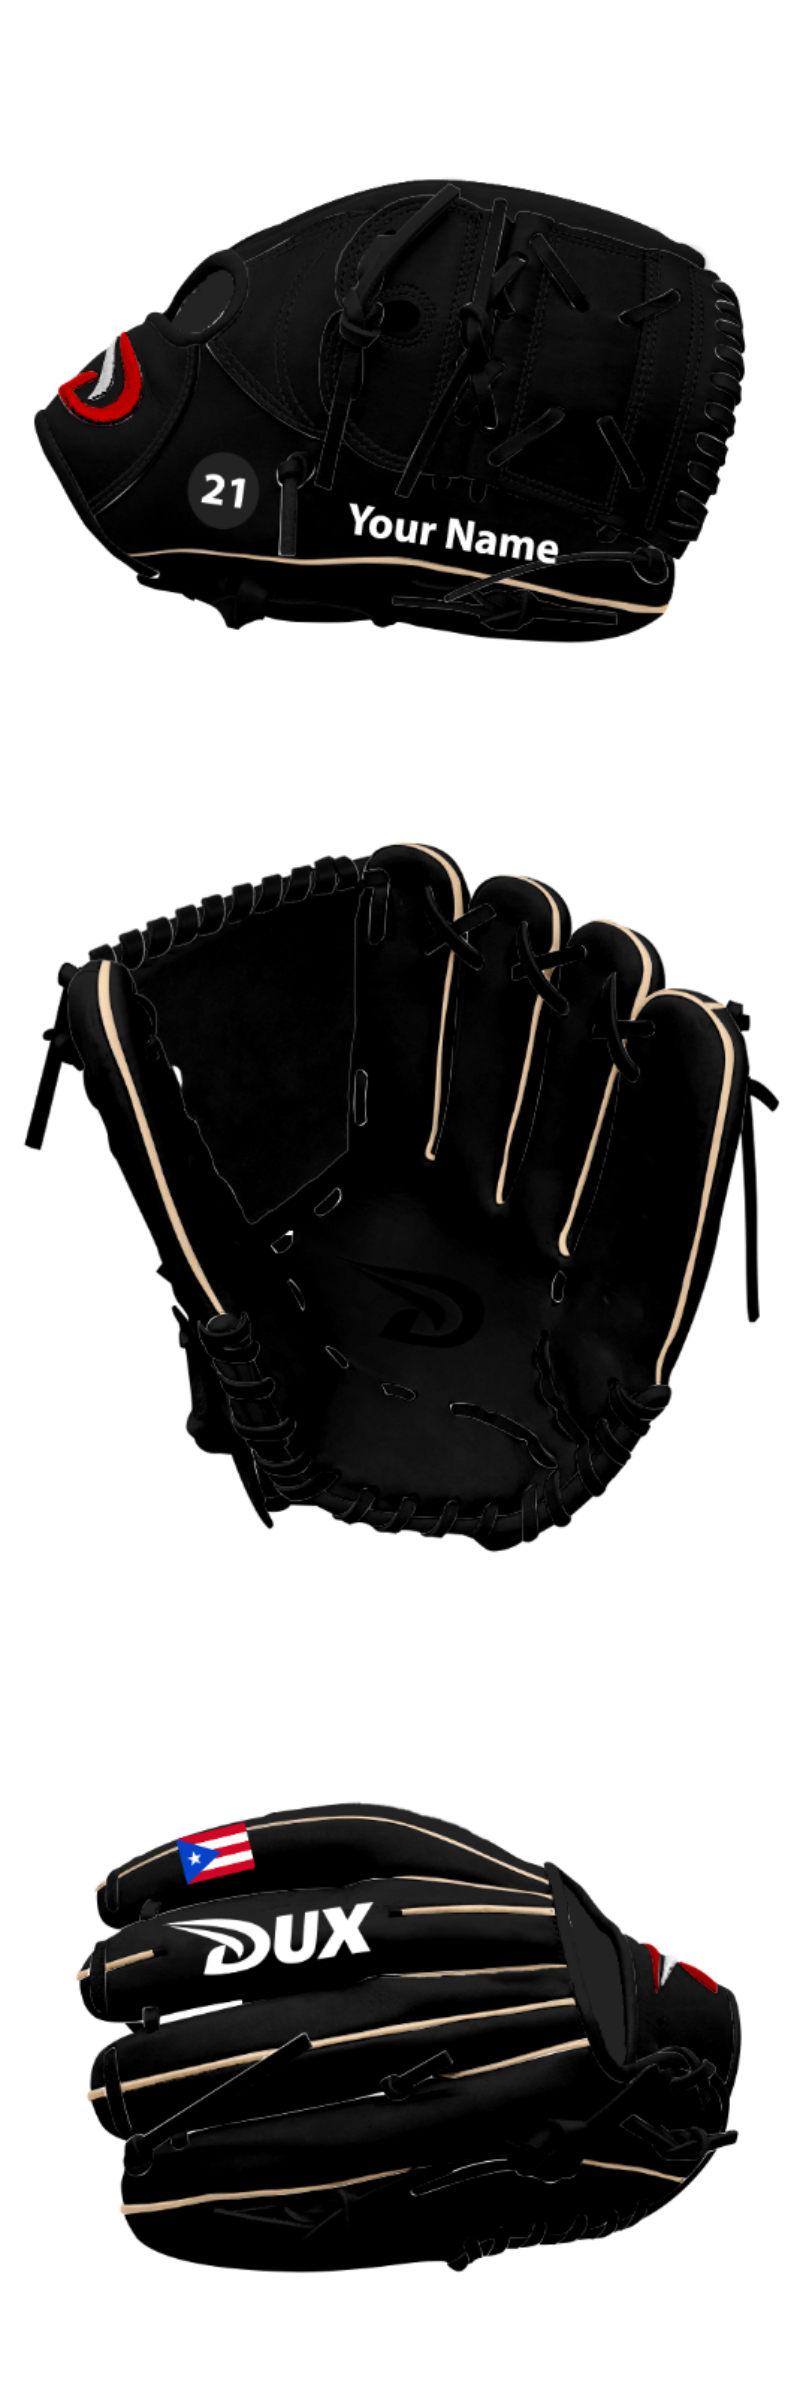 Dux Sports Custom Gloves - English - Customer's Product with price 199.98